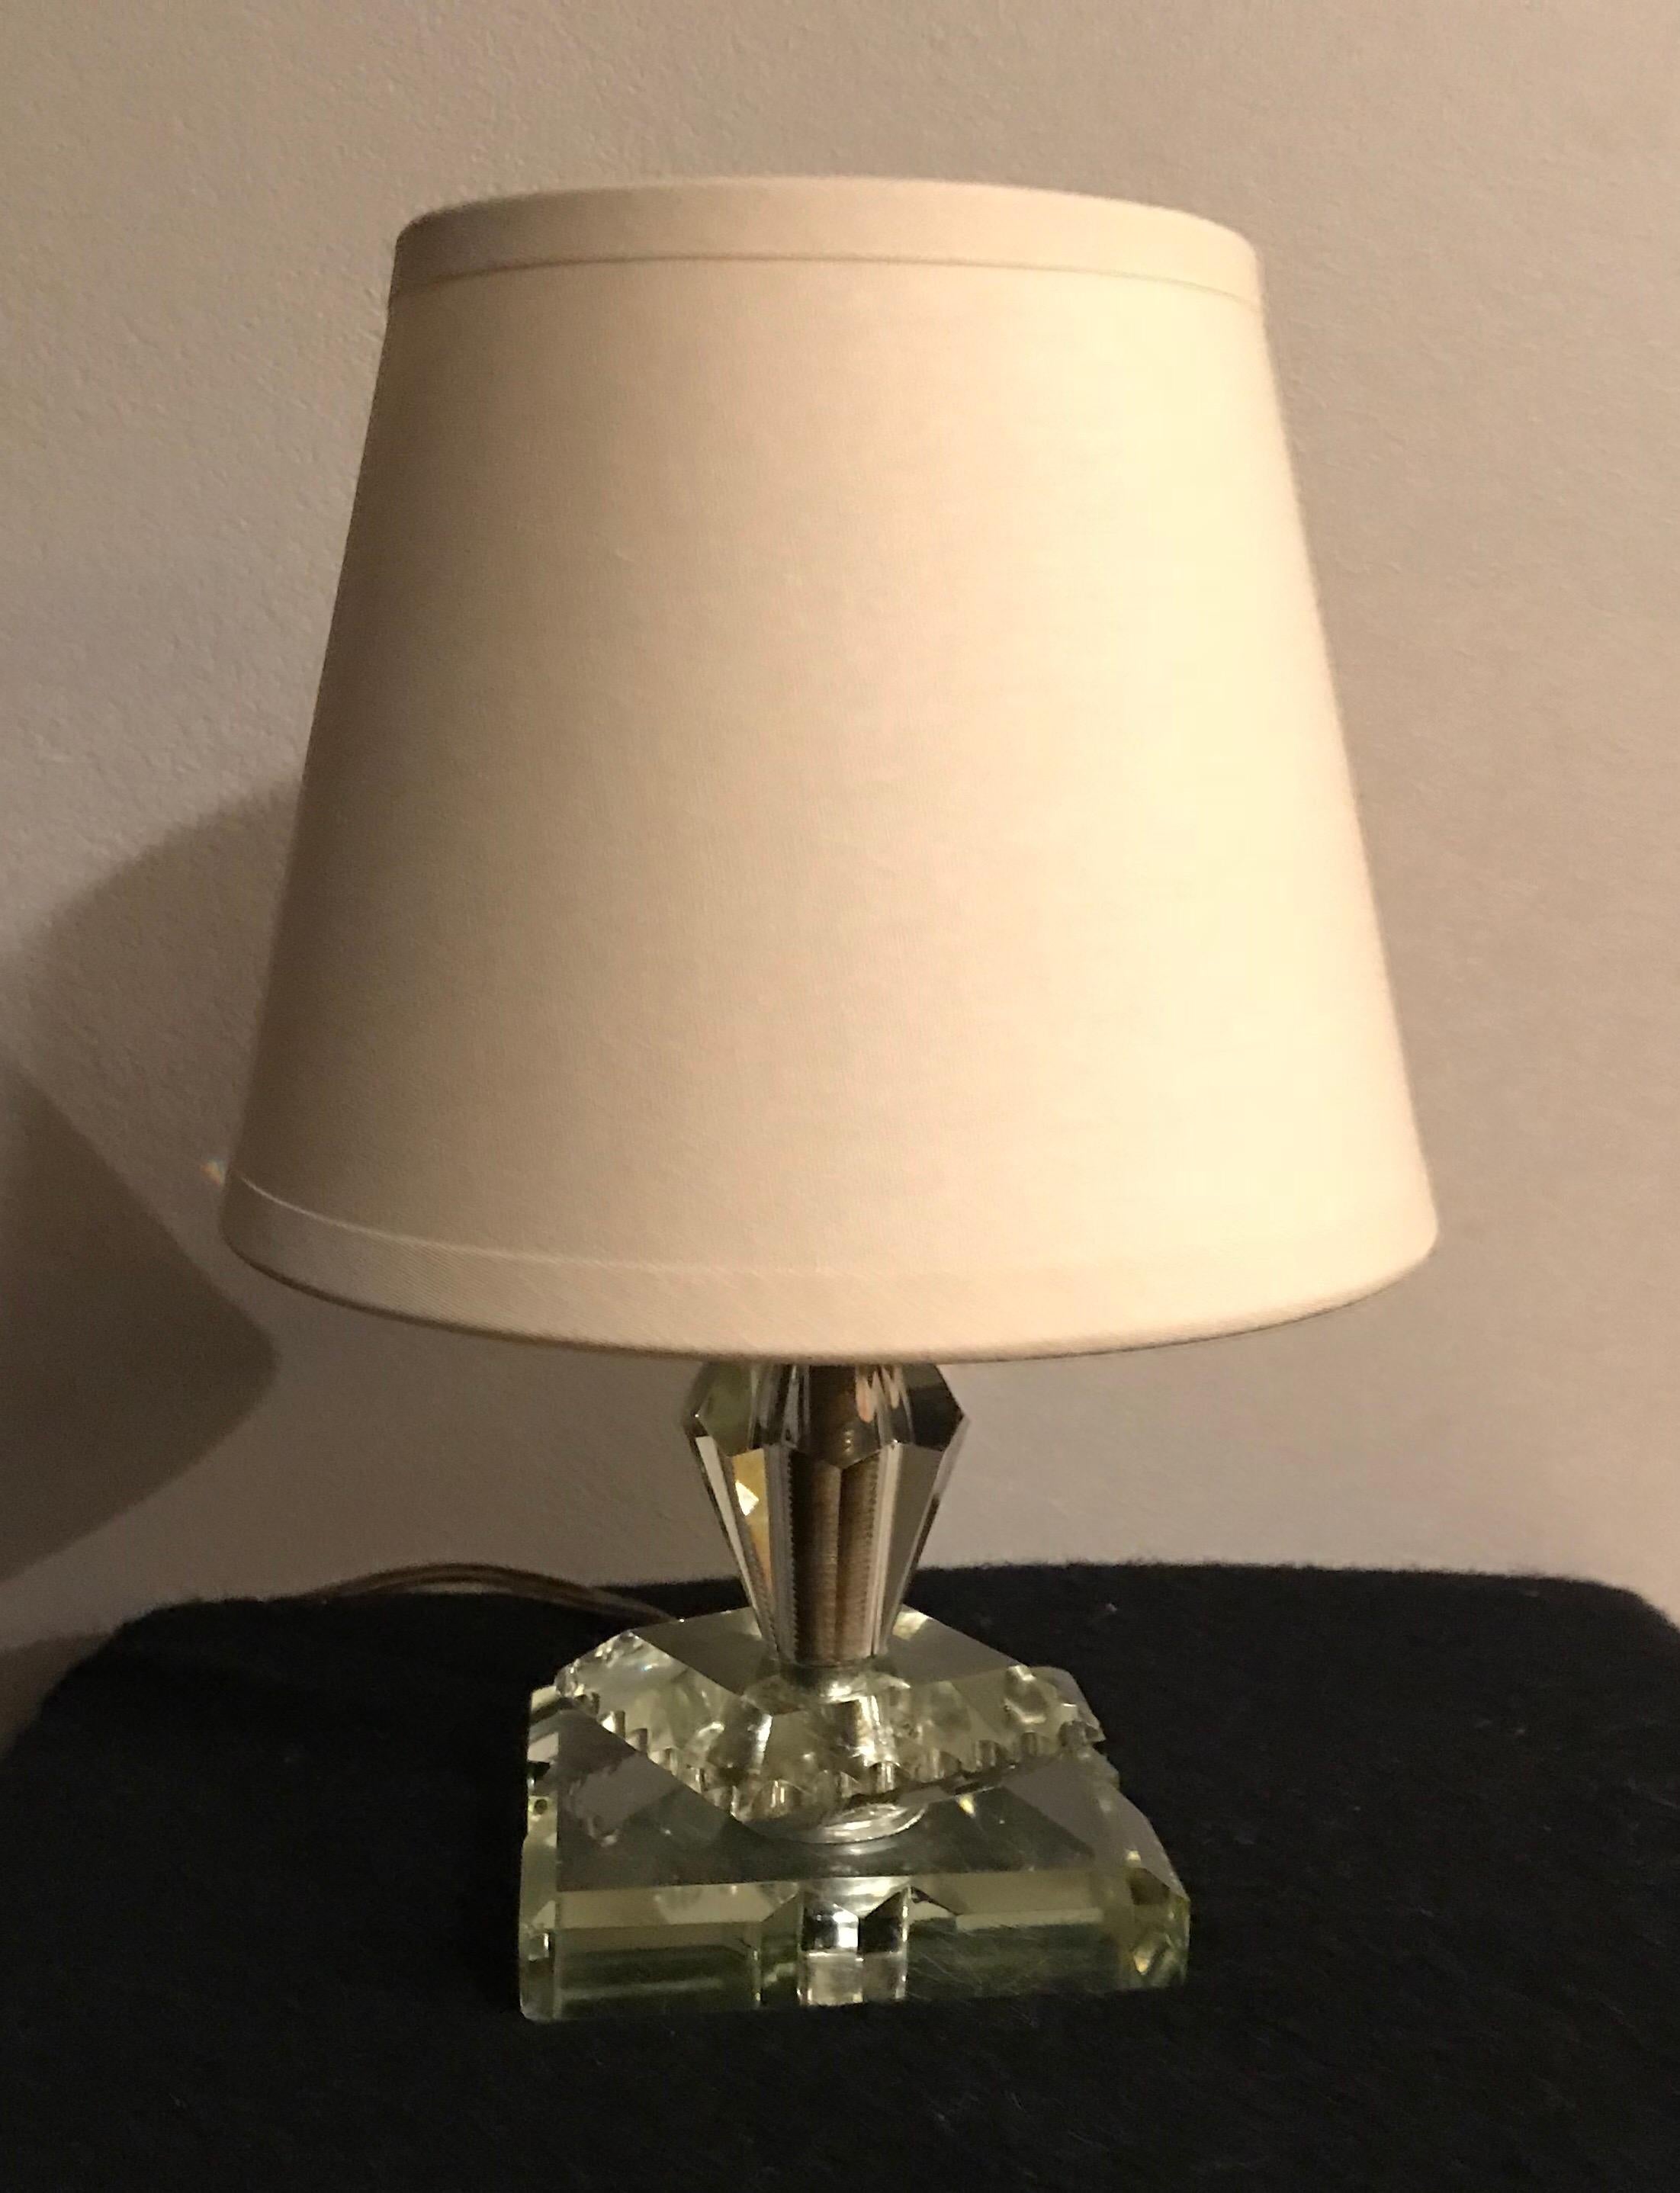 Very charming vintage table lamp in Adnet style with new cotton lampshade in a very good general condition.
Measures: H 22 cm x D 15,5 cm
Without the lampshade H 15 cm x D 8.5 cm
Base l 8.5 cm x L 8.5 cm.